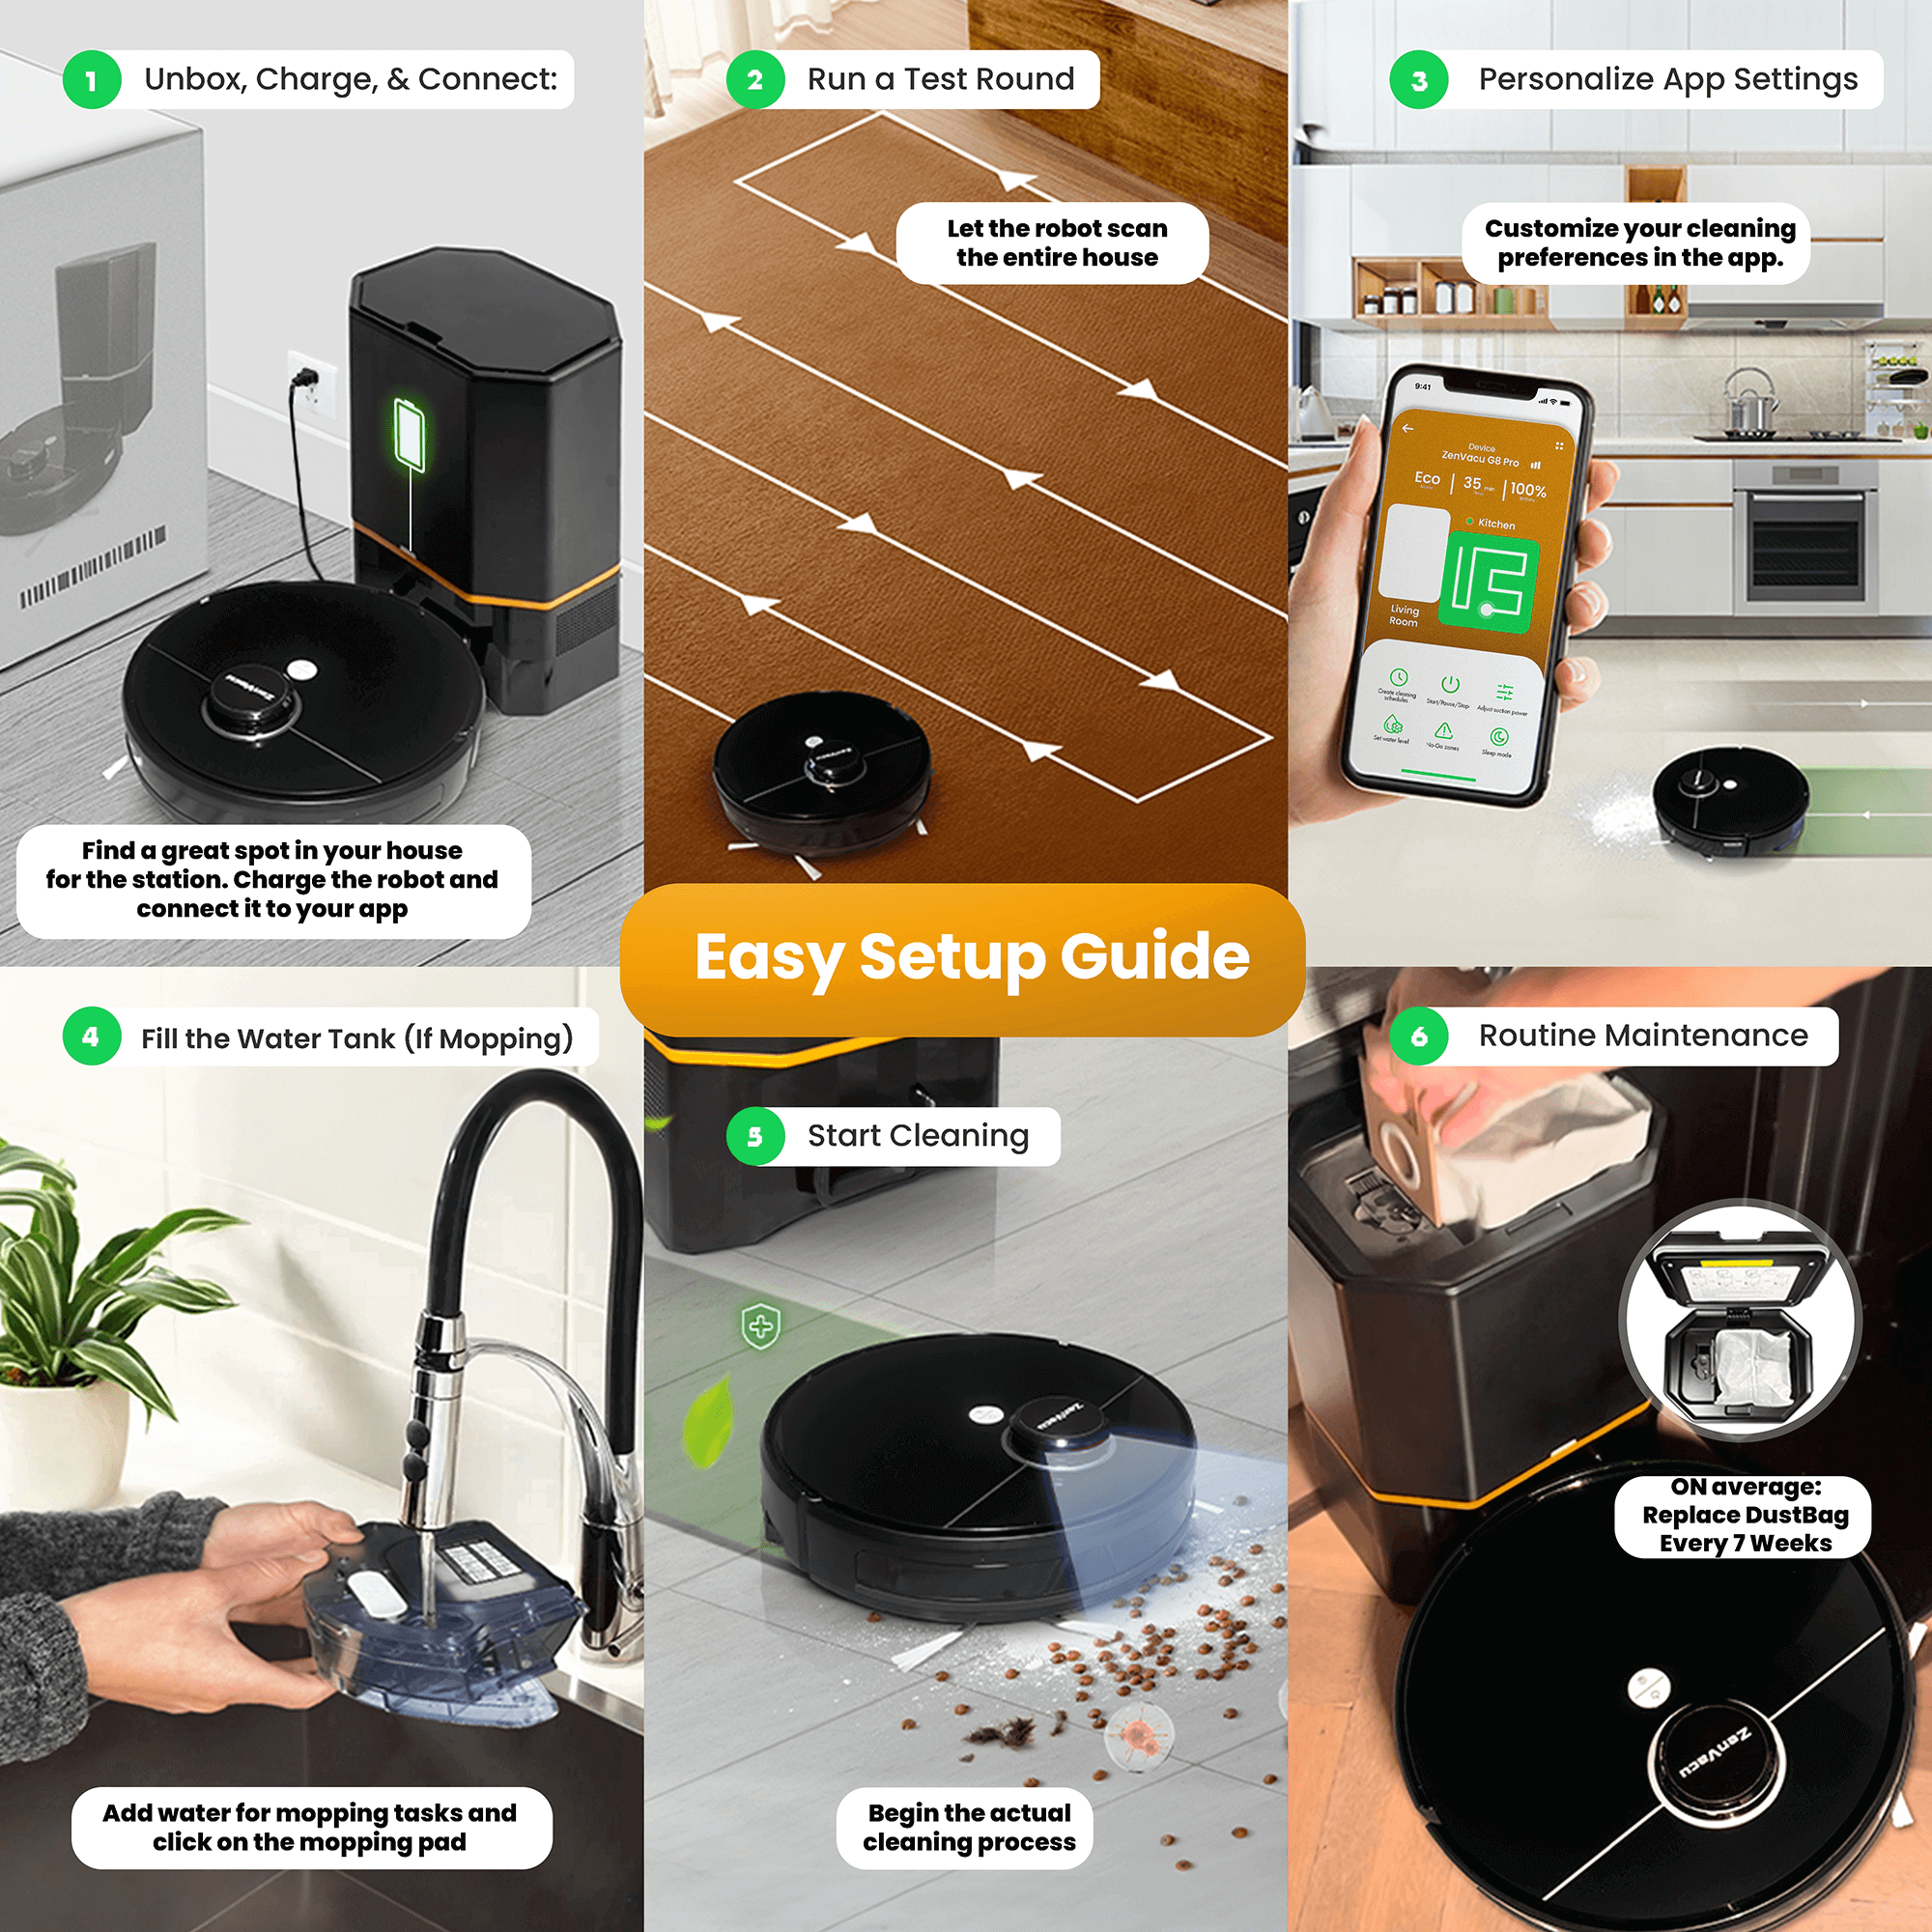 How to Use the ZenVacu G8 Pro Robot Vacuum: A Clear Step-by-Step Guide from Receiving to Using to Maintaining